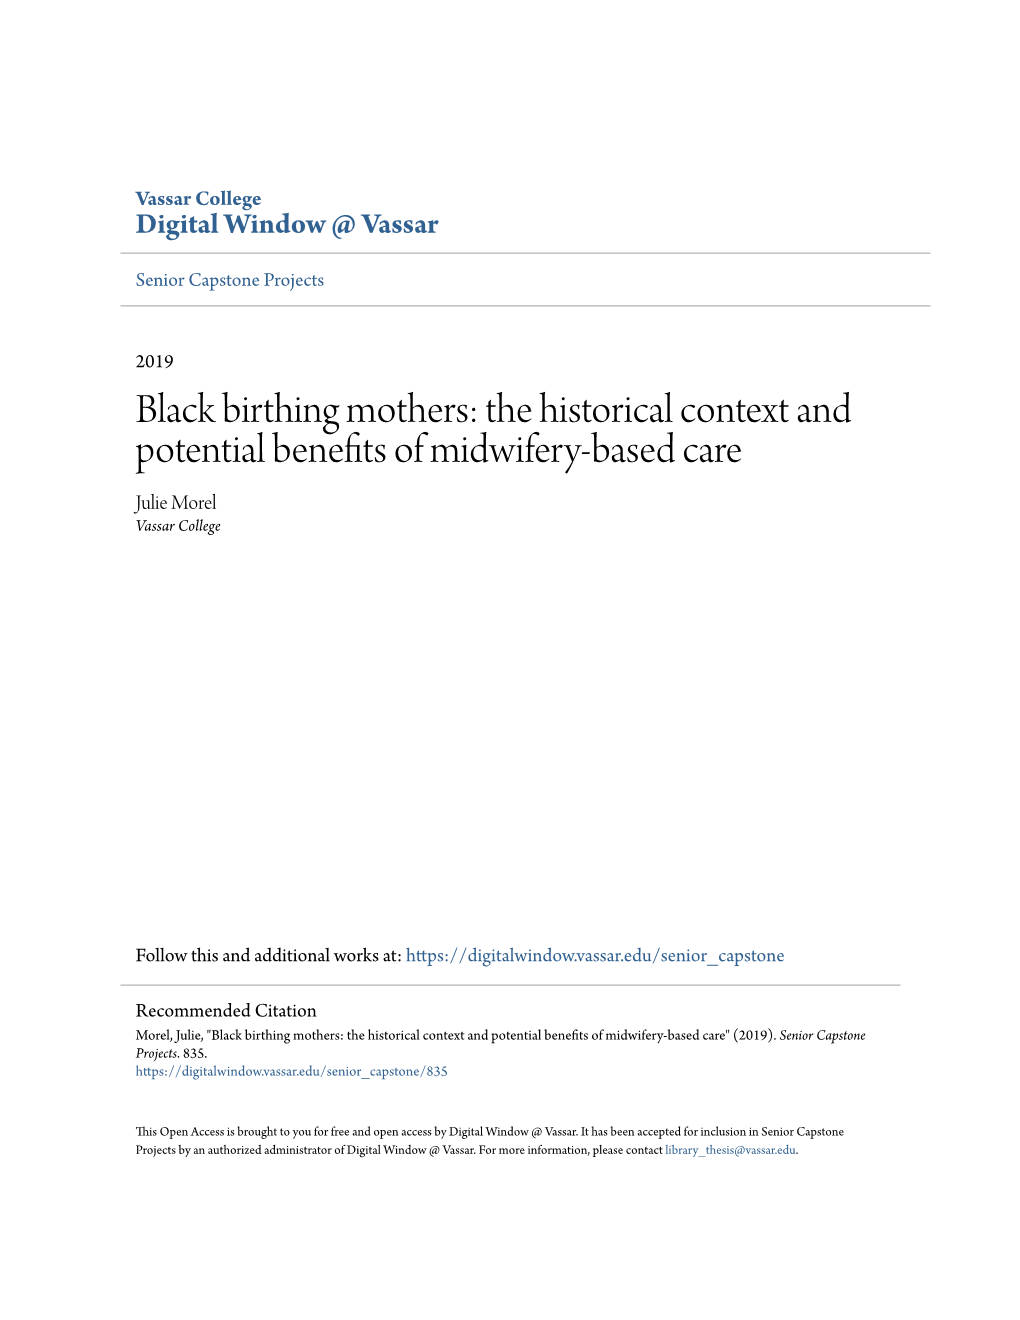 The Historical Context and Potential Benefits of Midwifery-Based Care Julie Morel Vassar College